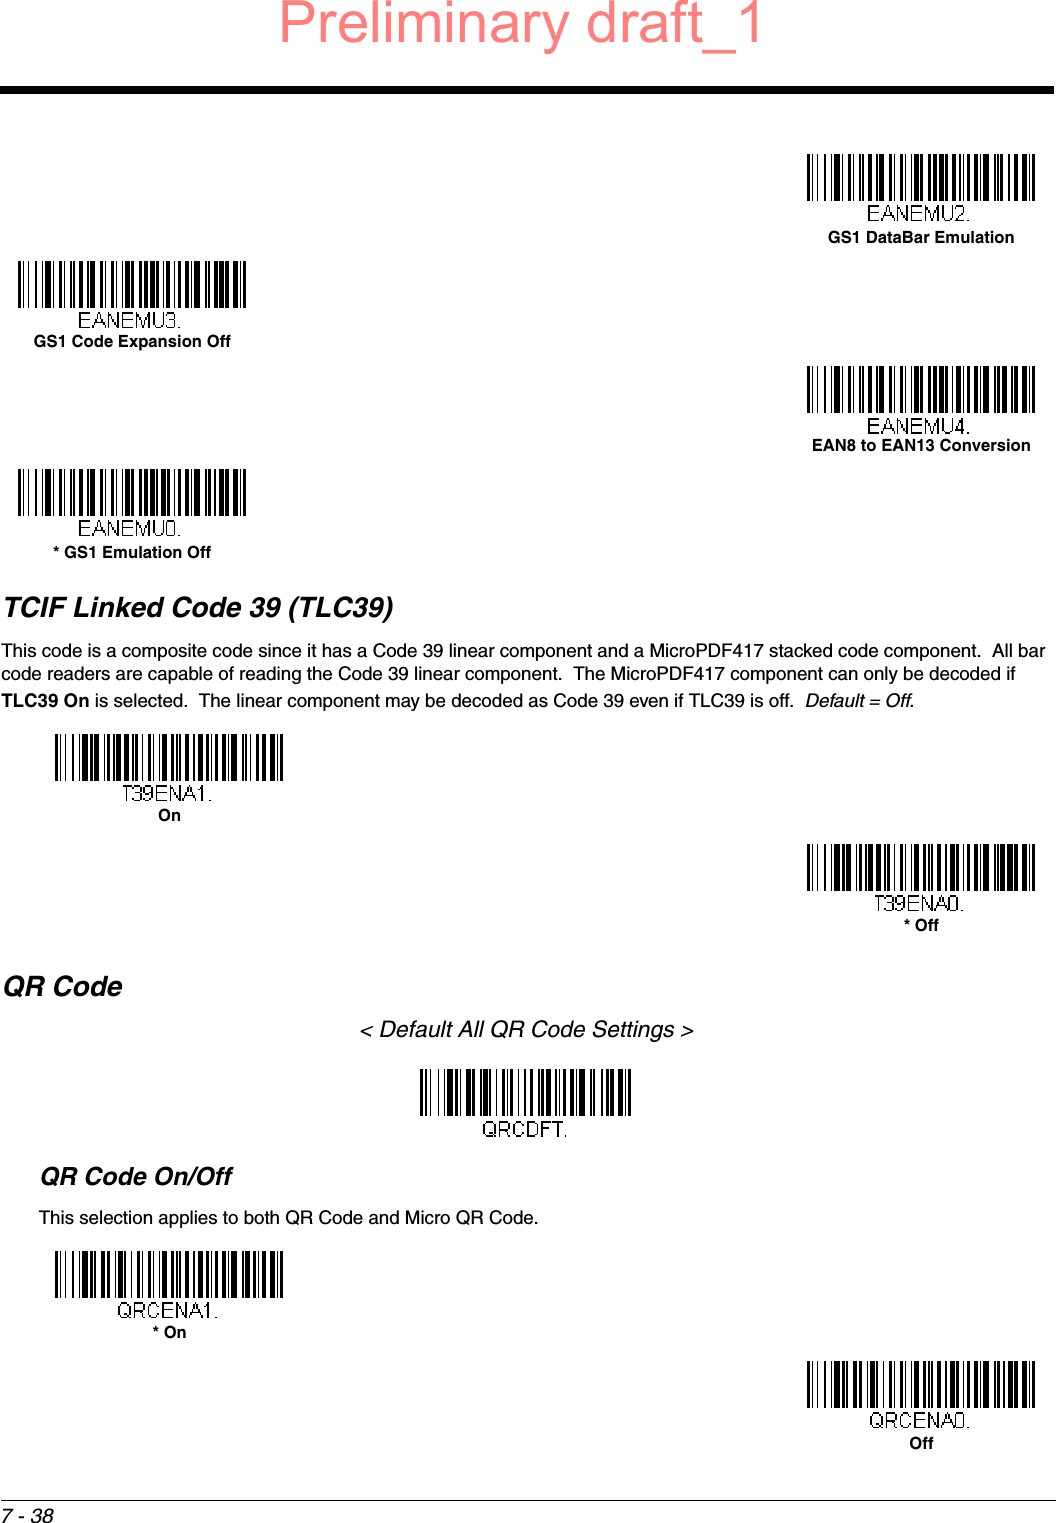 7 - 38TCIF Linked Code 39 (TLC39)This code is a composite code since it has a Code 39 linear component and a MicroPDF417 stacked code component.  All bar code readers are capable of reading the Code 39 linear component.  The MicroPDF417 component can only be decoded if TLC39 On is selected.  The linear component may be decoded as Code 39 even if TLC39 is off.  Default = Off.  QR Code&lt; Default All QR Code Settings &gt;QR Code On/OffThis selection applies to both QR Code and Micro QR Code.GS1 DataBar EmulationGS1 Code Expansion OffEAN8 to EAN13 Conversion* GS1 Emulation OffOn* Off* OnOffPreliminary draft_1